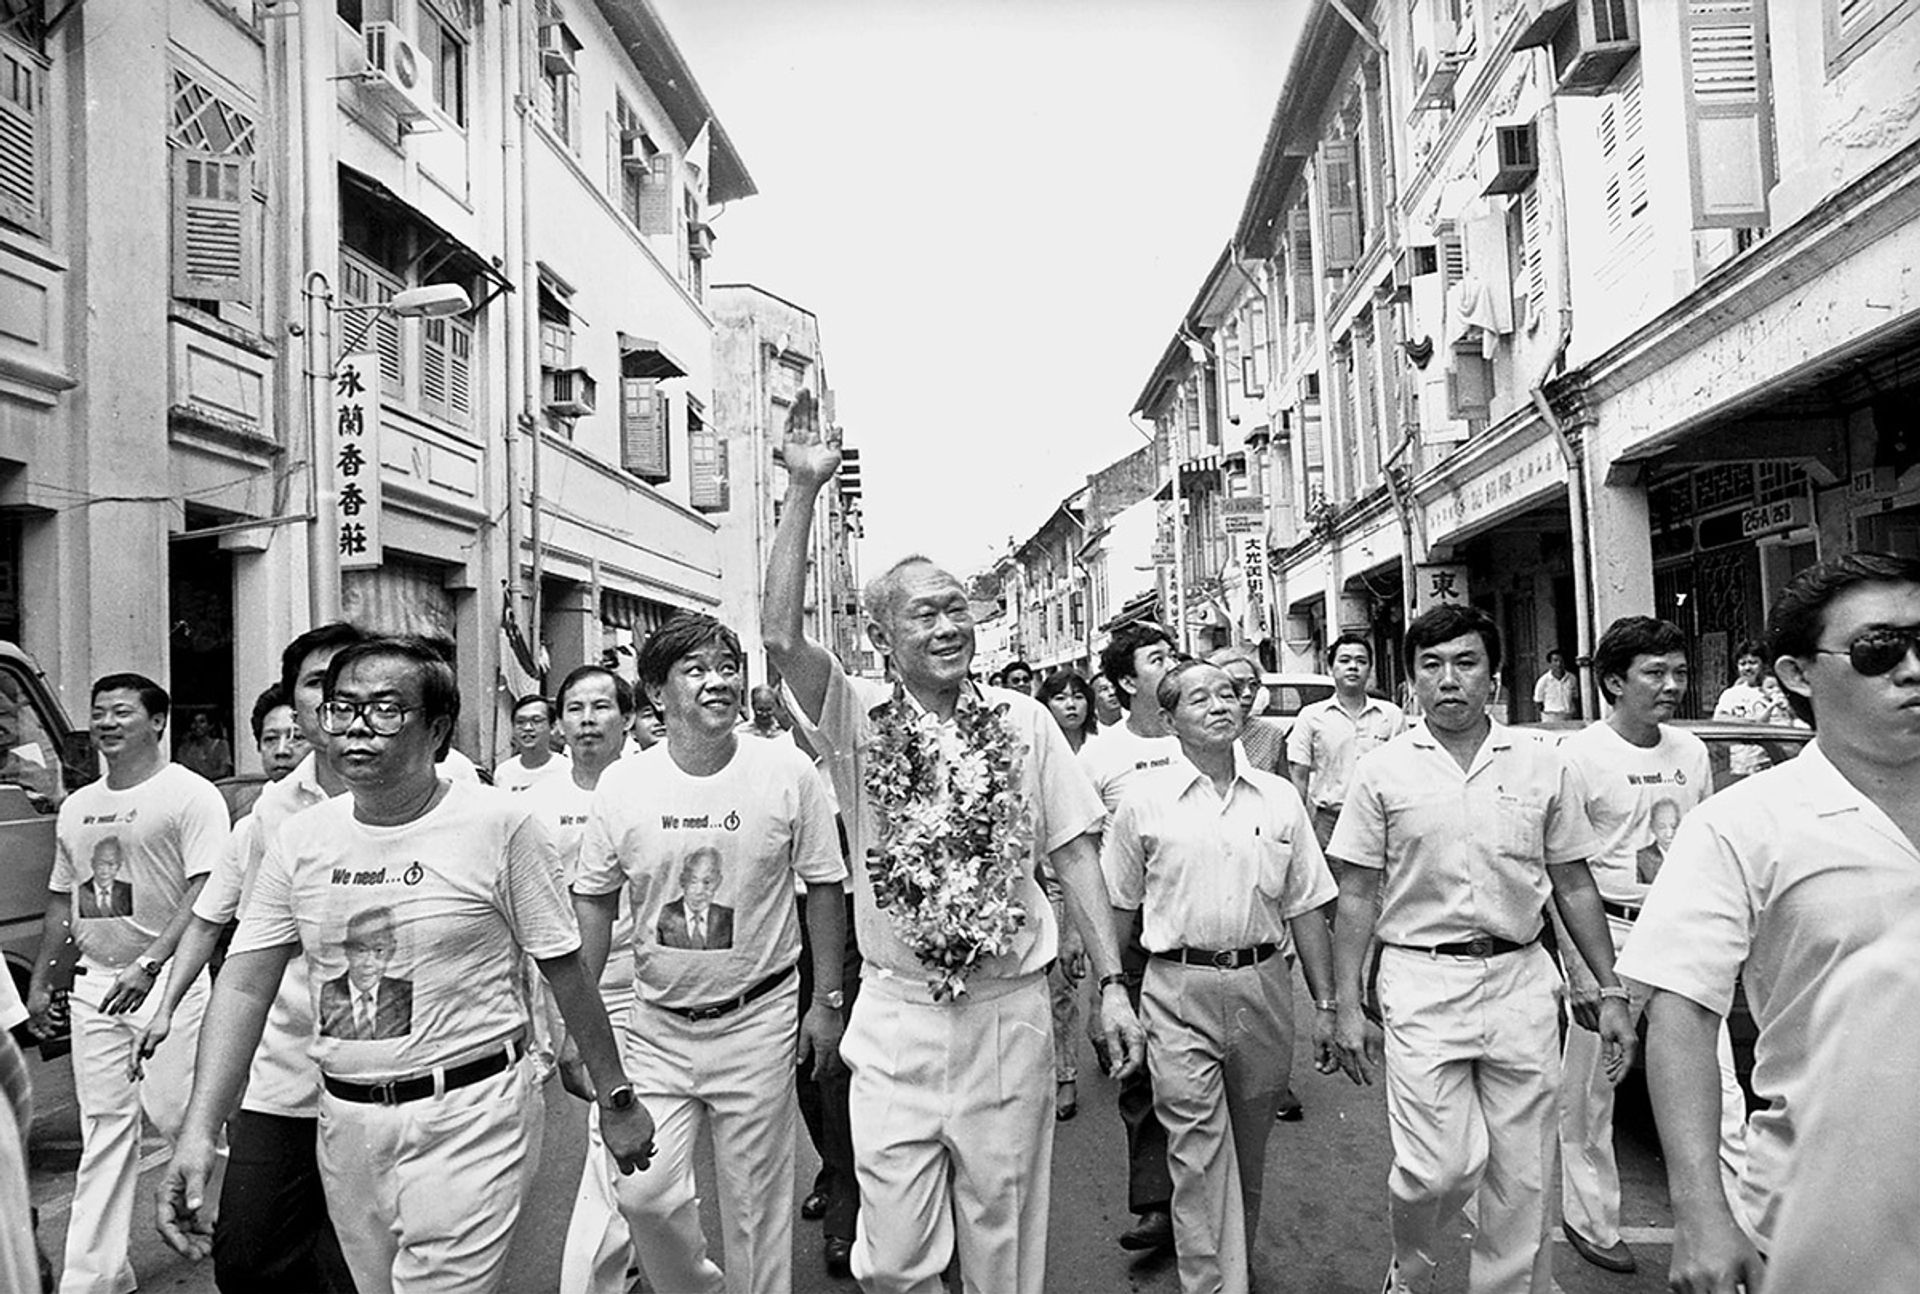 Mr Lee canvassing for votes in Tanjong Pagar during the hustings on Aug 28, 1988. ST Photo: Wan Seng Yip